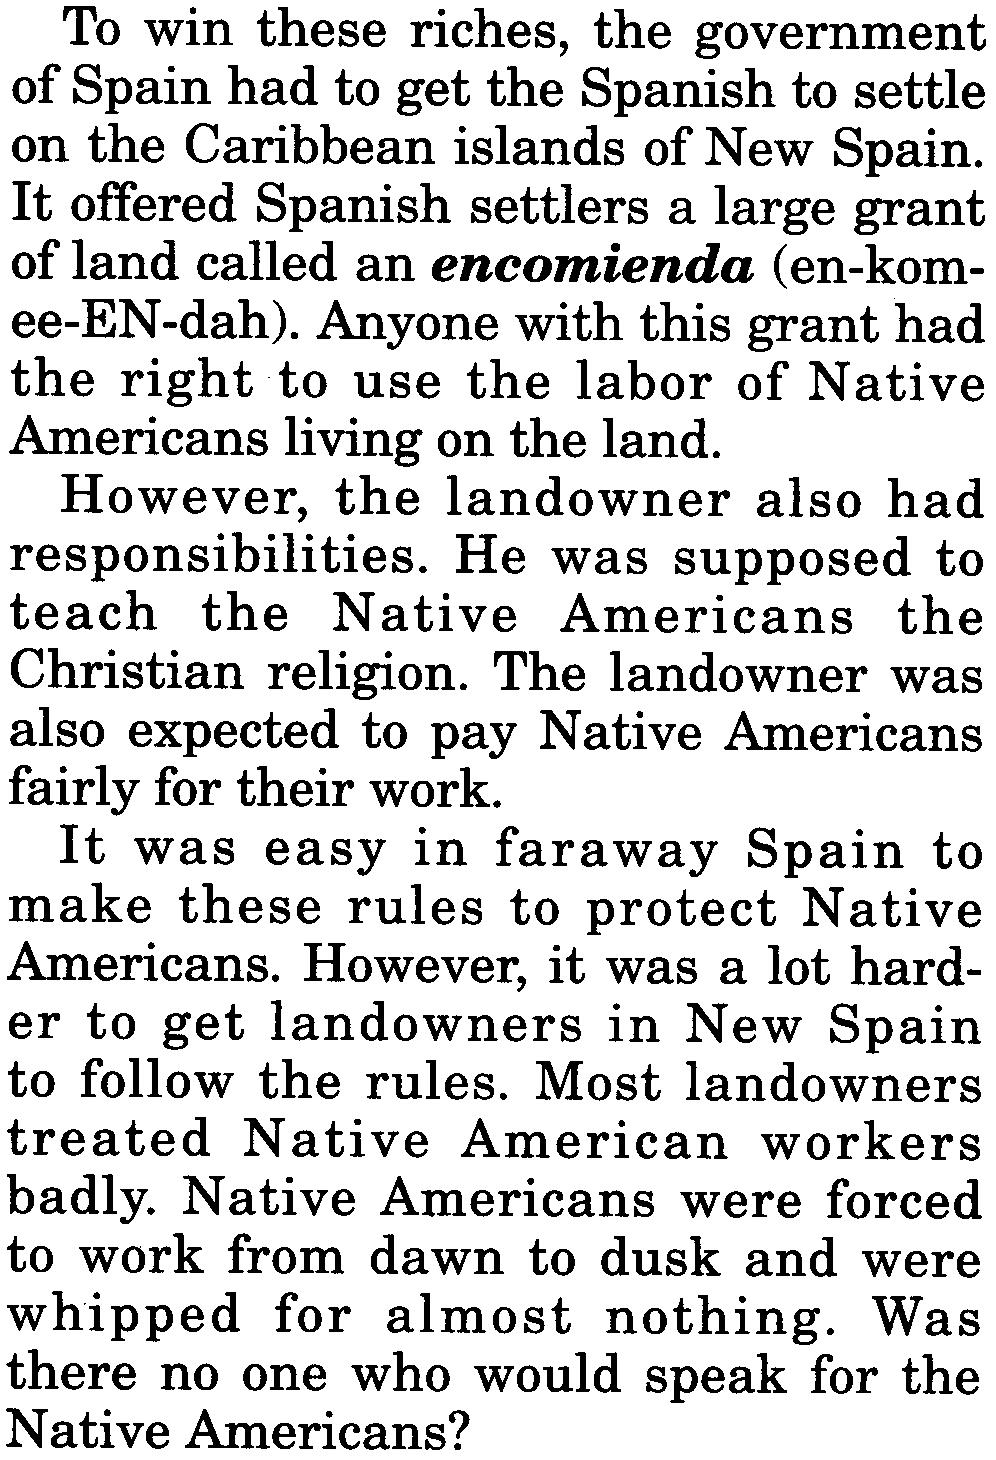 It was easy in faraway Spain to make these rules to protect Native Americans. However, it was a lot harder to get landowners in New Spain to follow the rules.